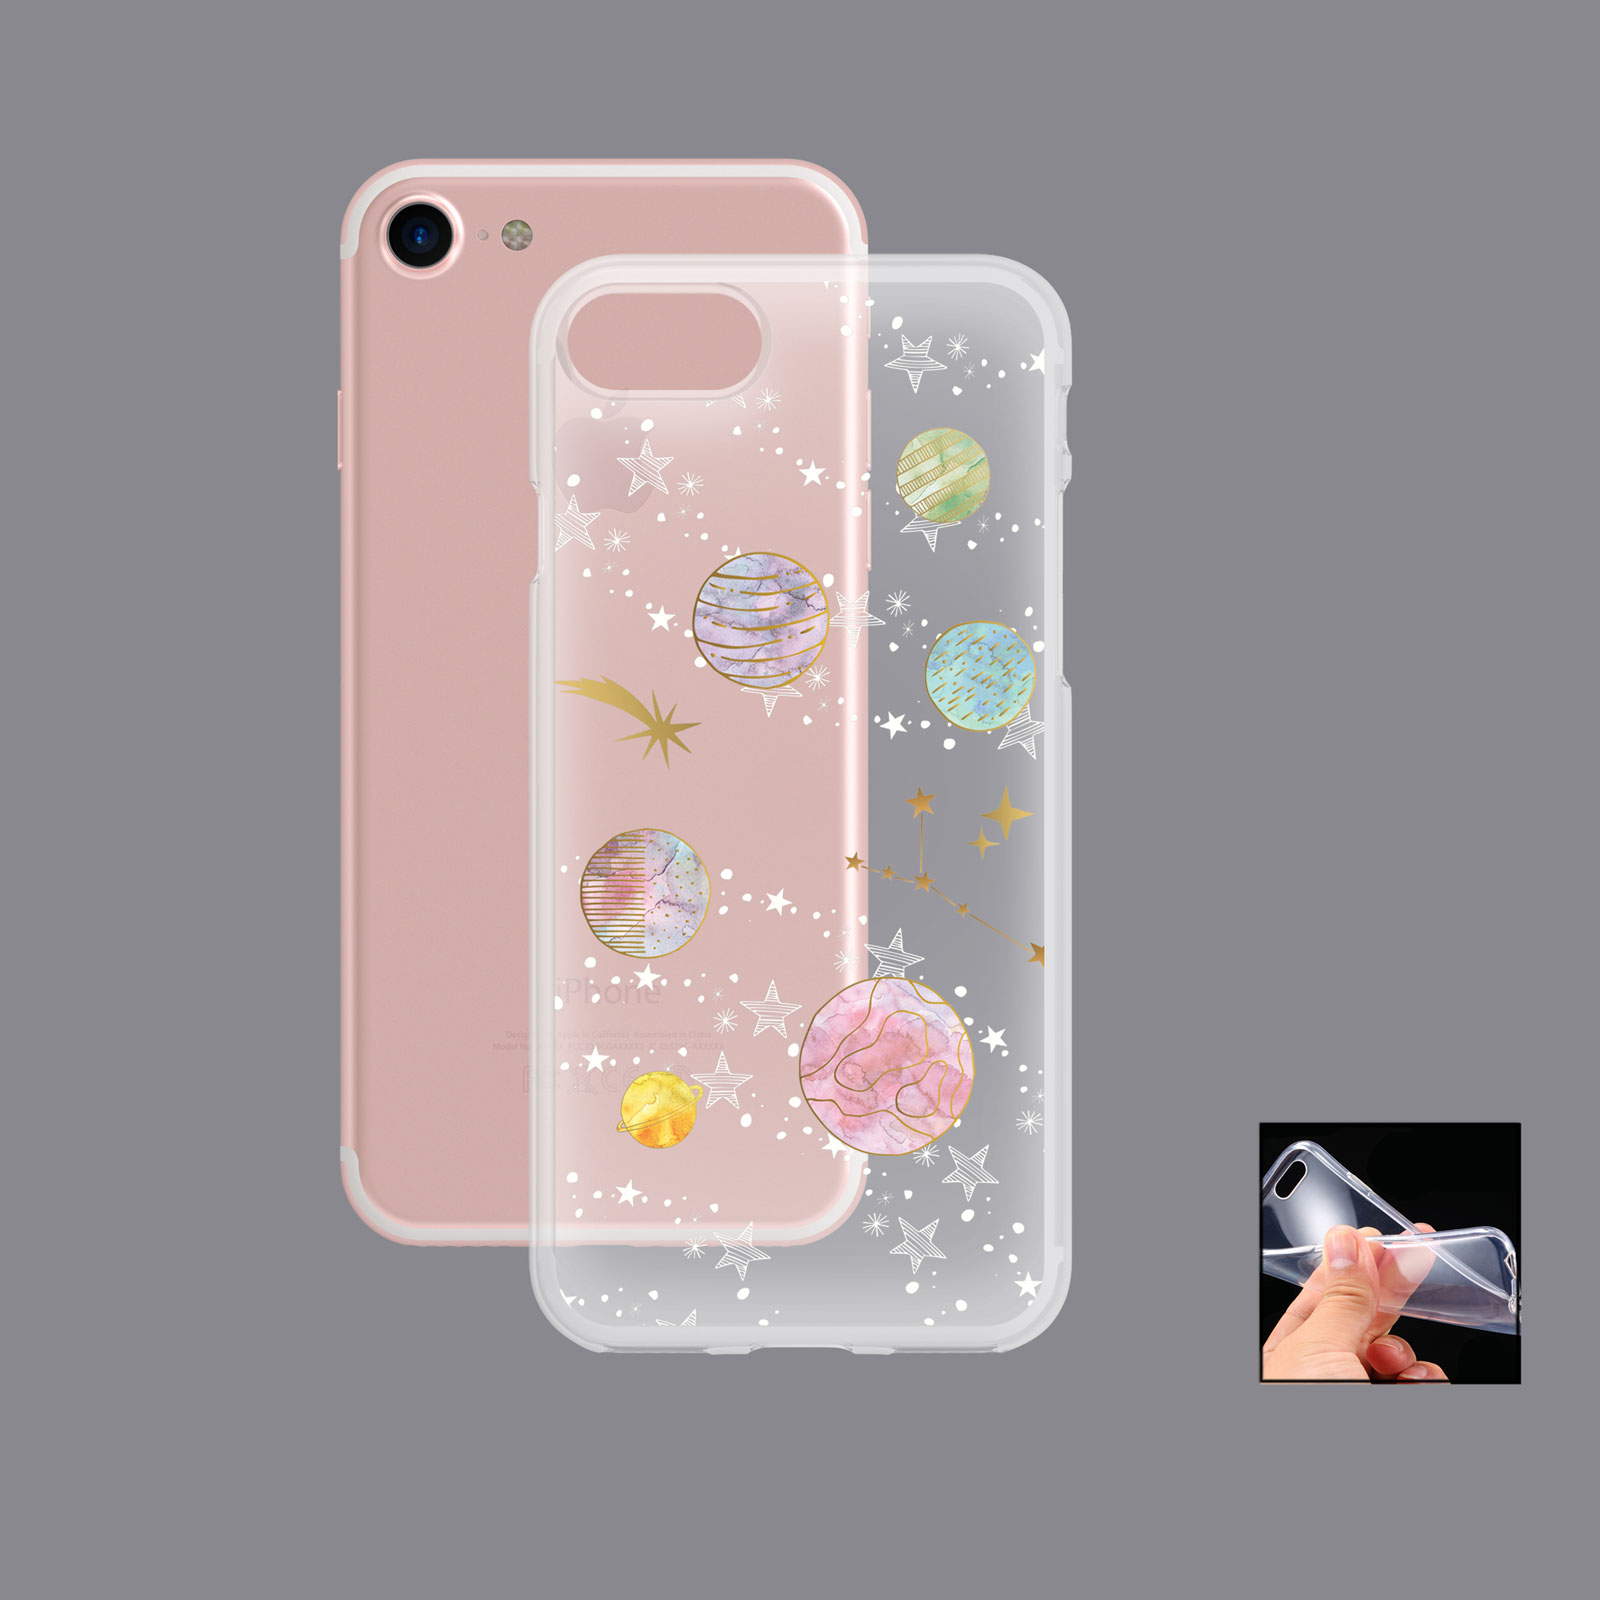 Aesthetic Planets Space Stars Galaxy Soft Clear Phone Case For Iphone Samsung Ebay